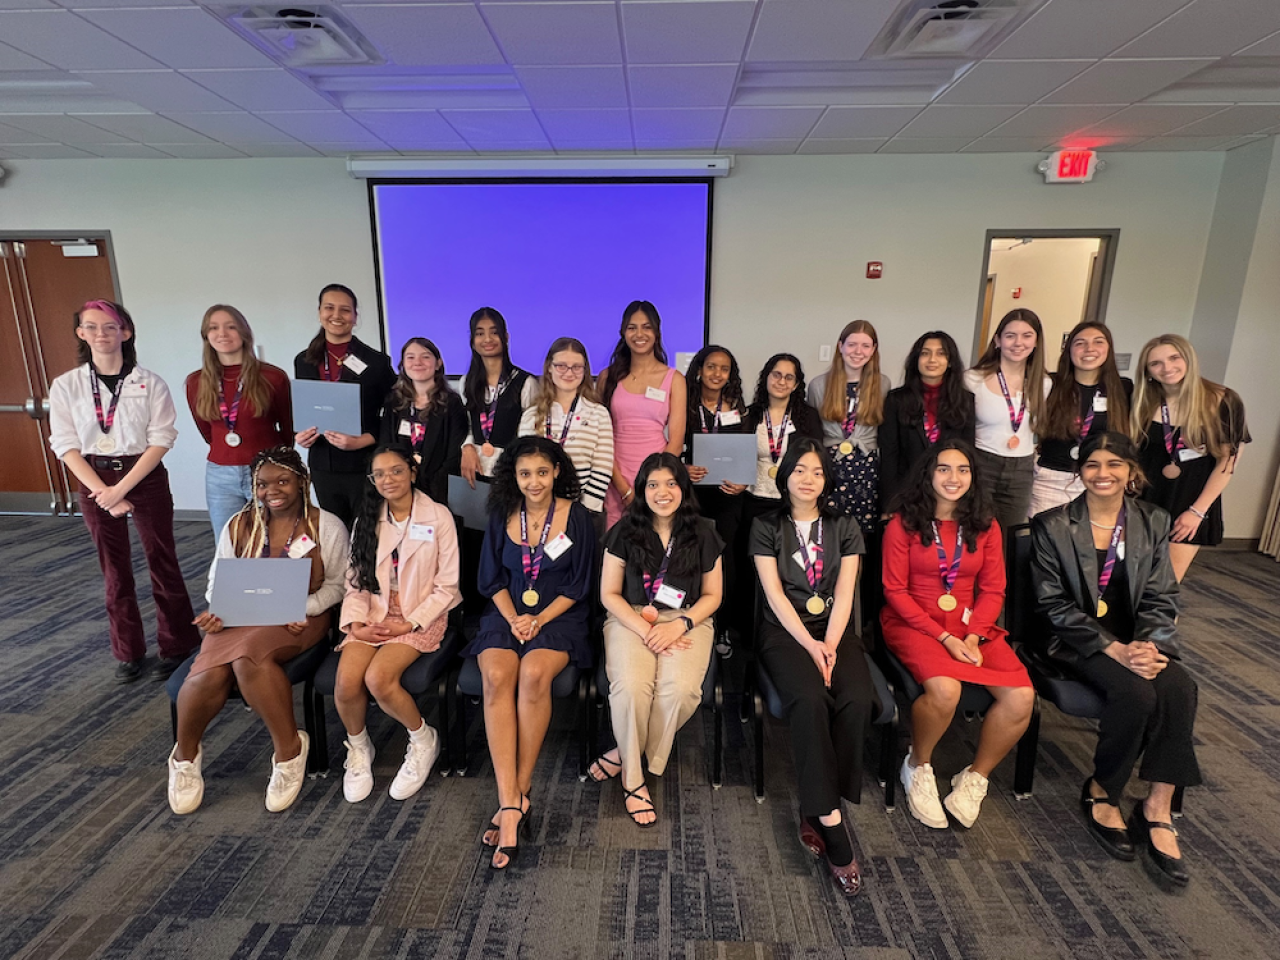 The Ohio affiliate of the National Center for Women & Information Technology (NCWIT) honored high school students across Ohio at the 2024 Aspirations in Computing awards ceremony on Saturday, April 20th in Columbus Ohio.